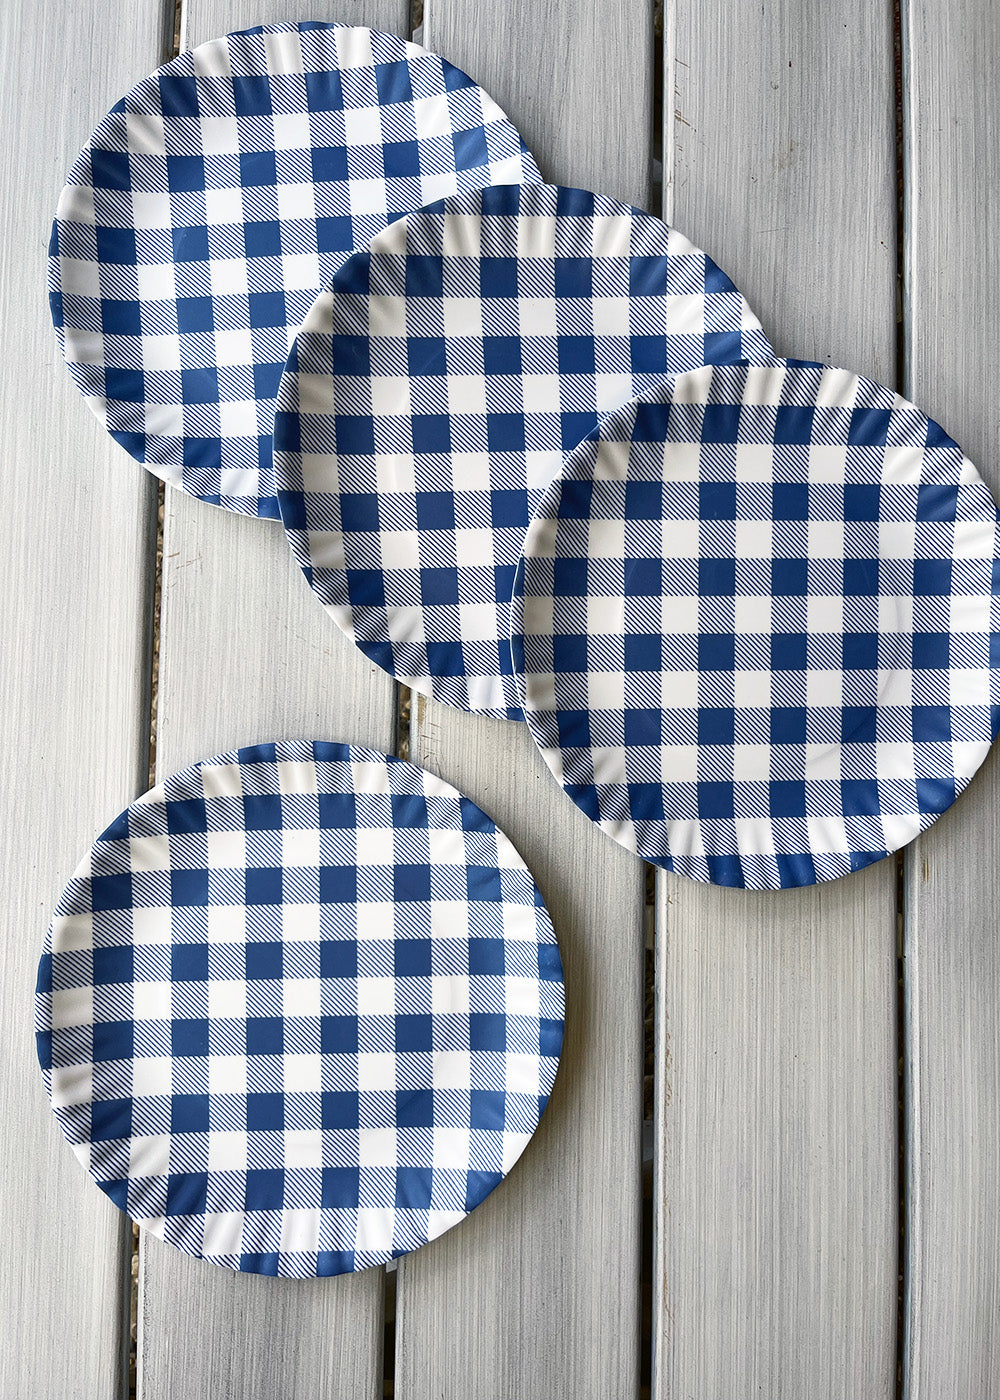 Red Gingham Melamine Luncheon Plates